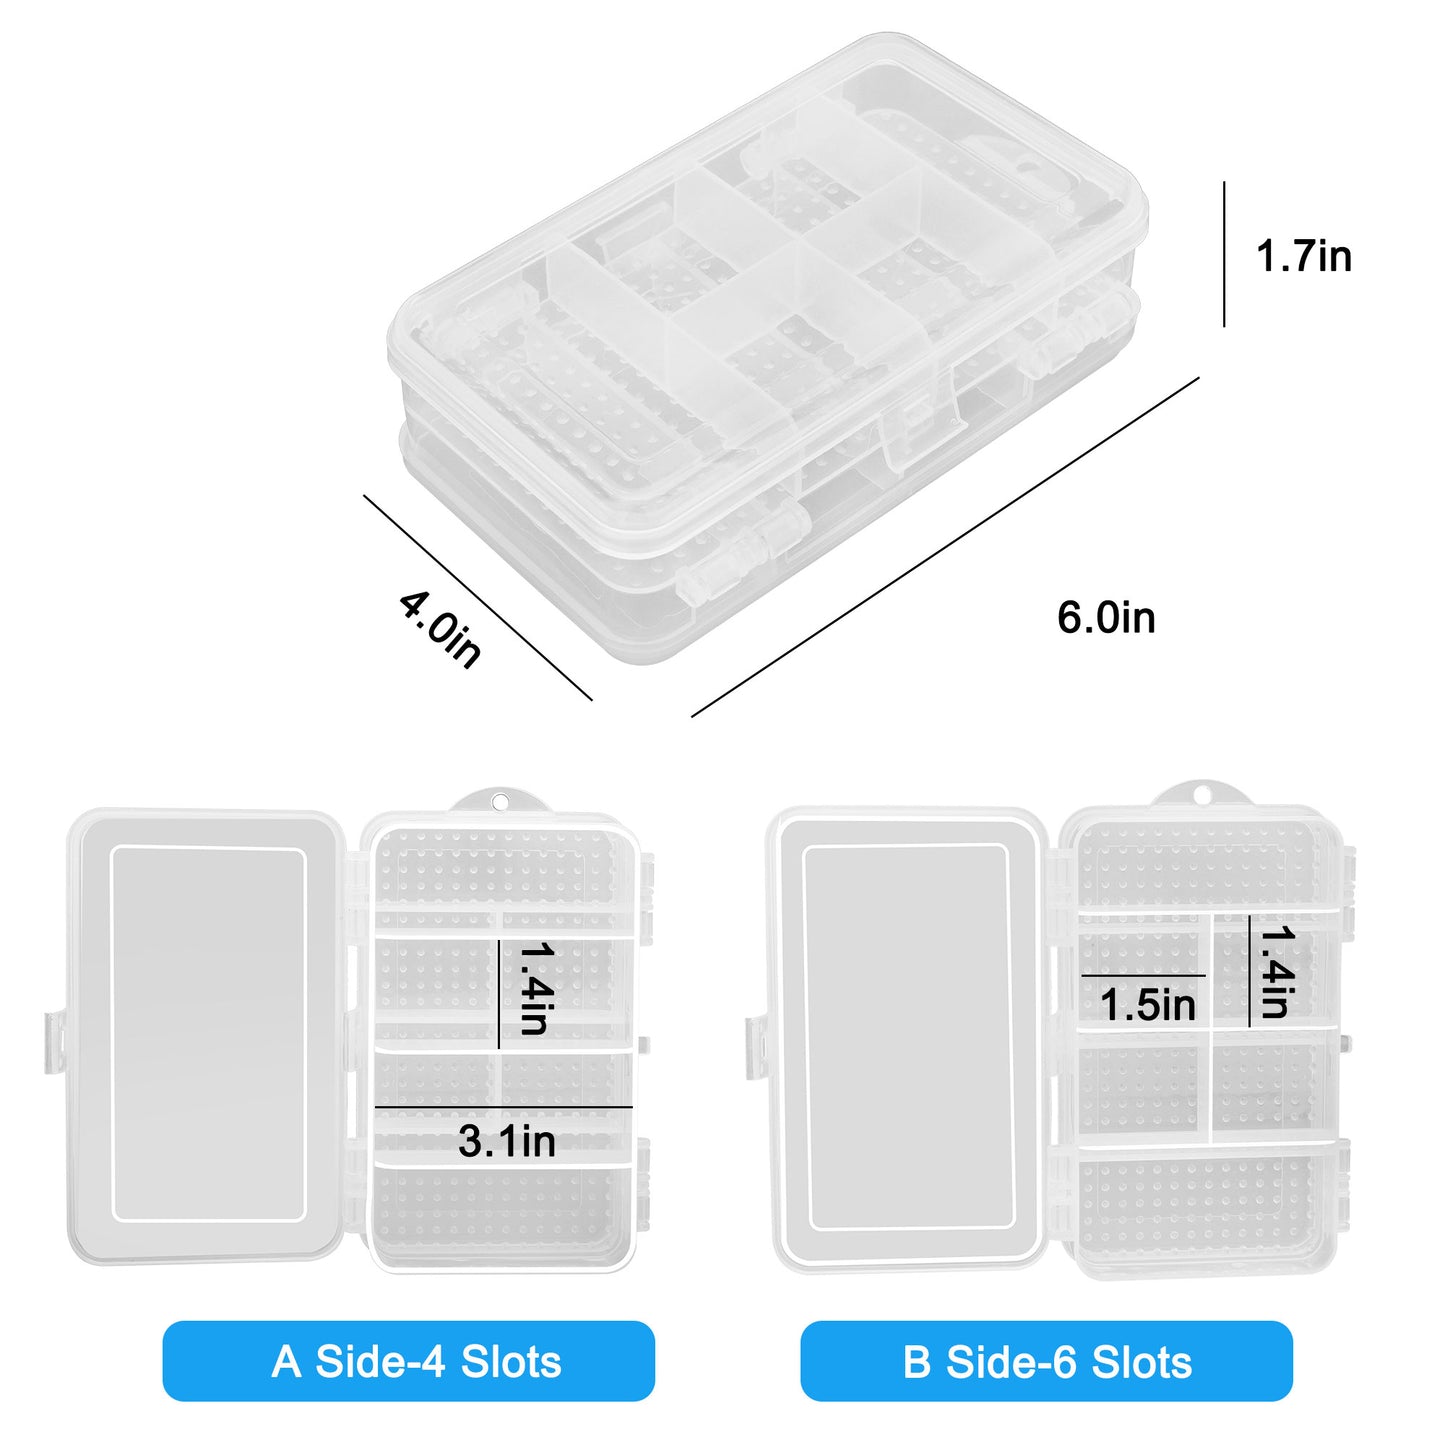 Double sided Transparent Storage Box - Clear 10 Slots Jewelry Storage Box Case Earrings Organizer Holder Jewelry Container for Earrings rings